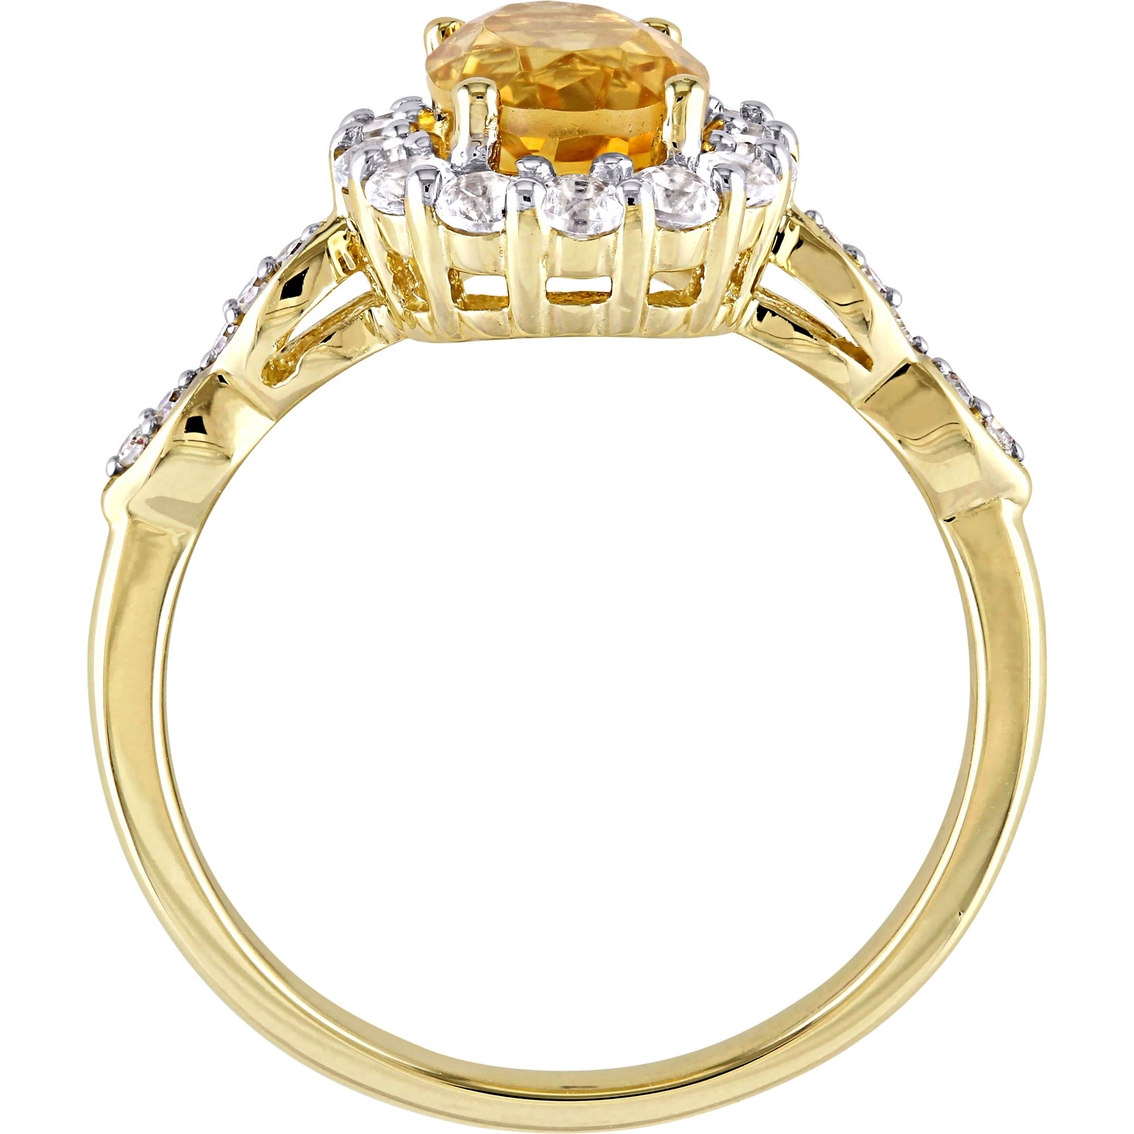 Sofia B. 14K Yellow Gold Citrine and White Topaz and Diamond Accent Halo Ring - Image 3 of 4